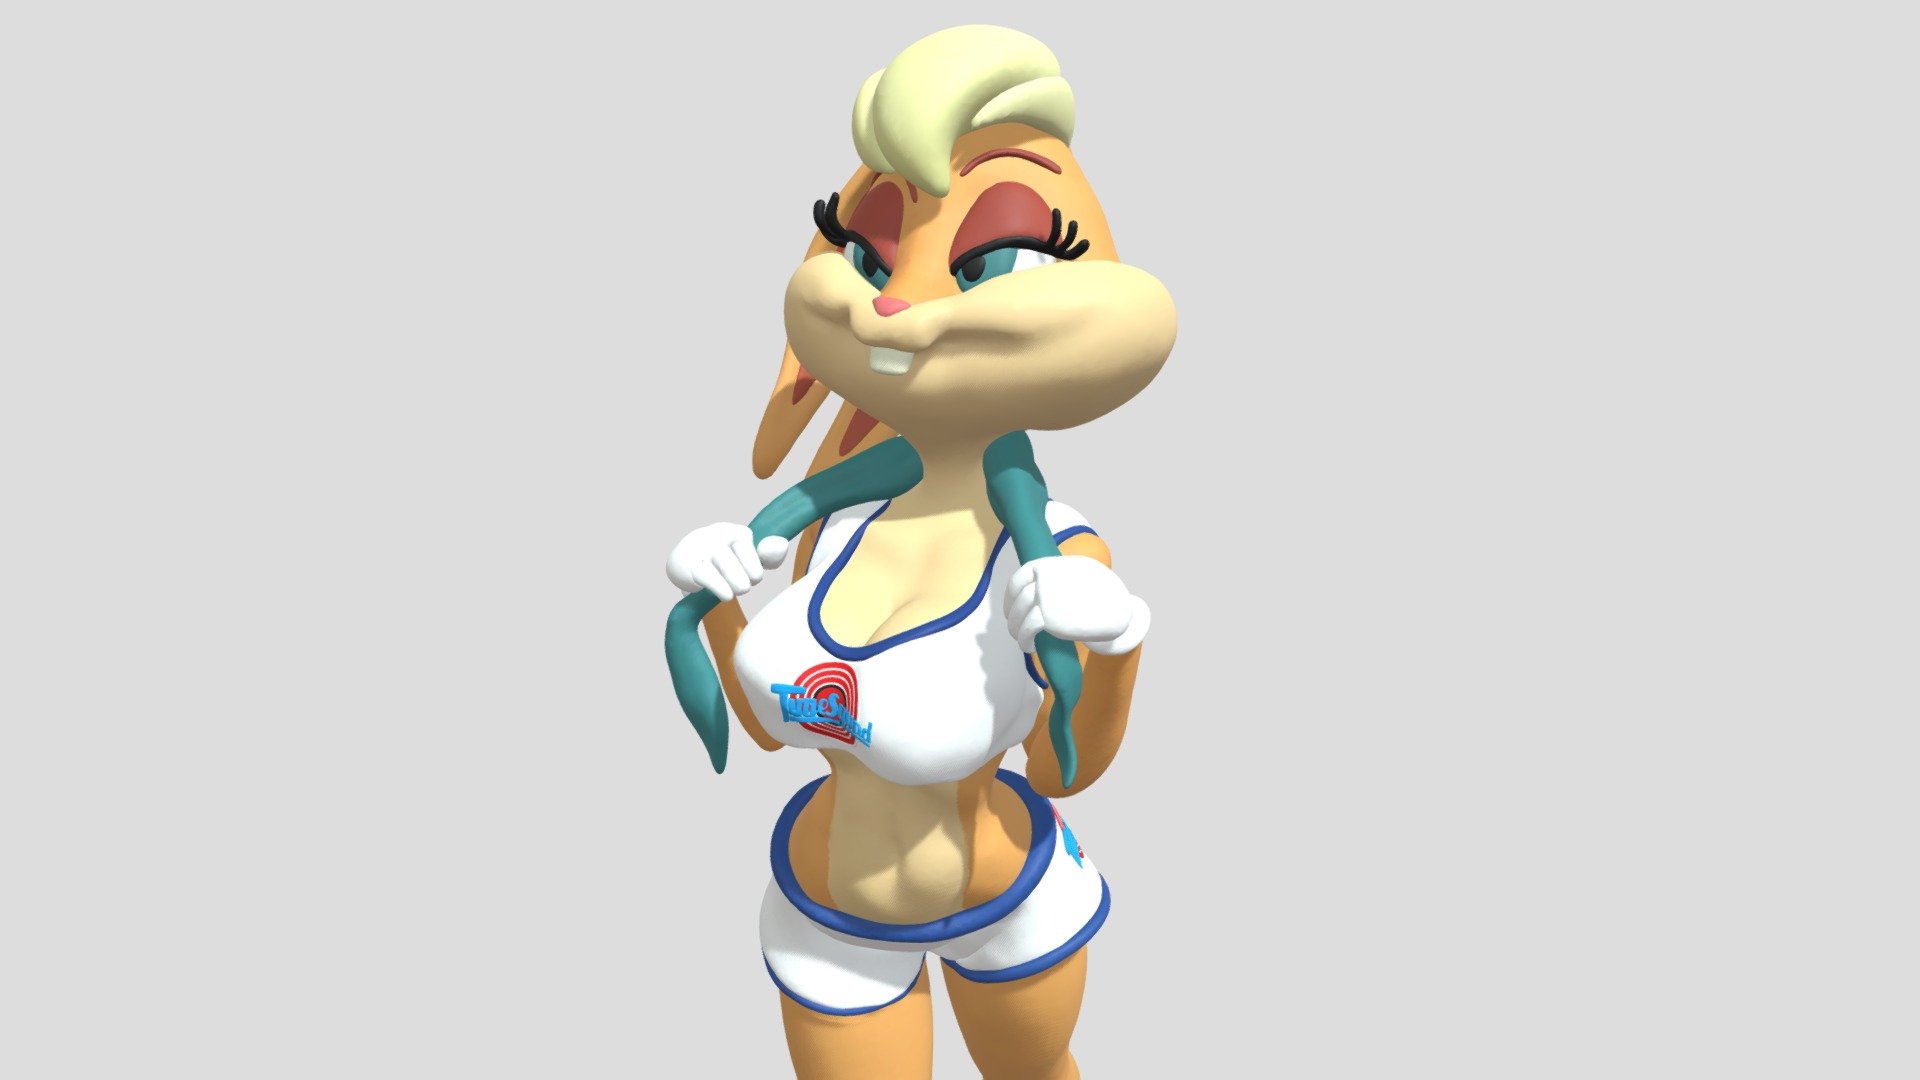 Here is a sexy Lola bunny 3d print, Available here: https://cults3d.com/en/...